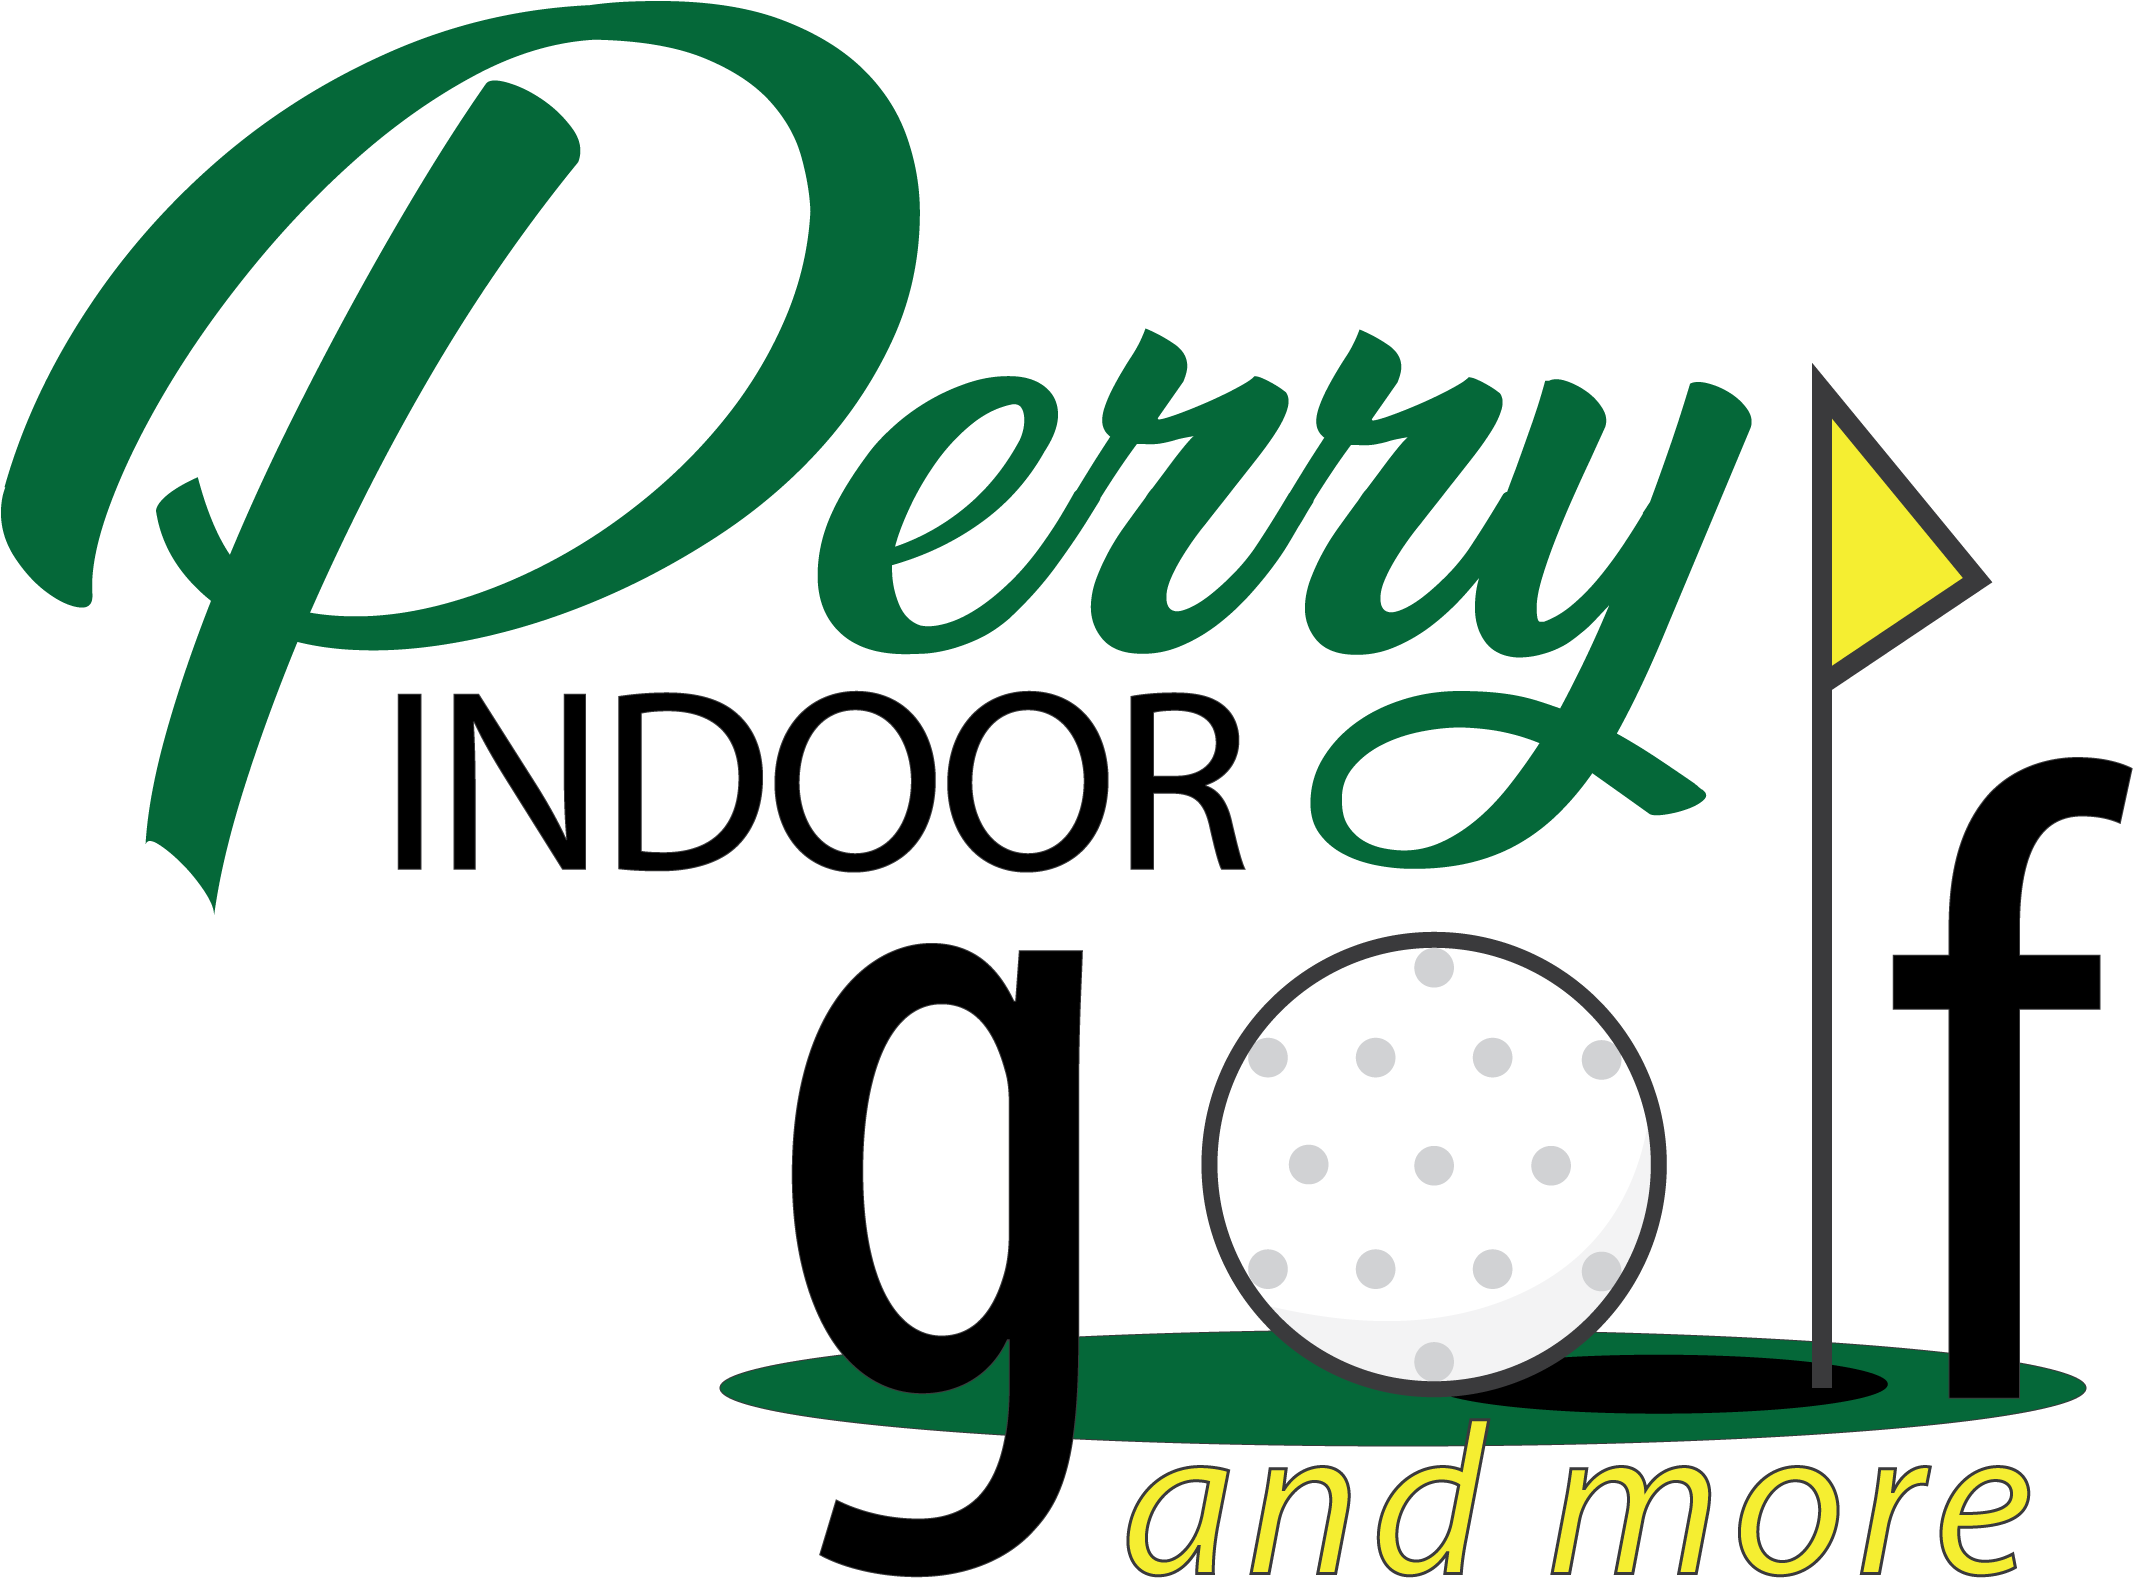 Perry Indoor Golf And More - Photo Booth (2160x1605)